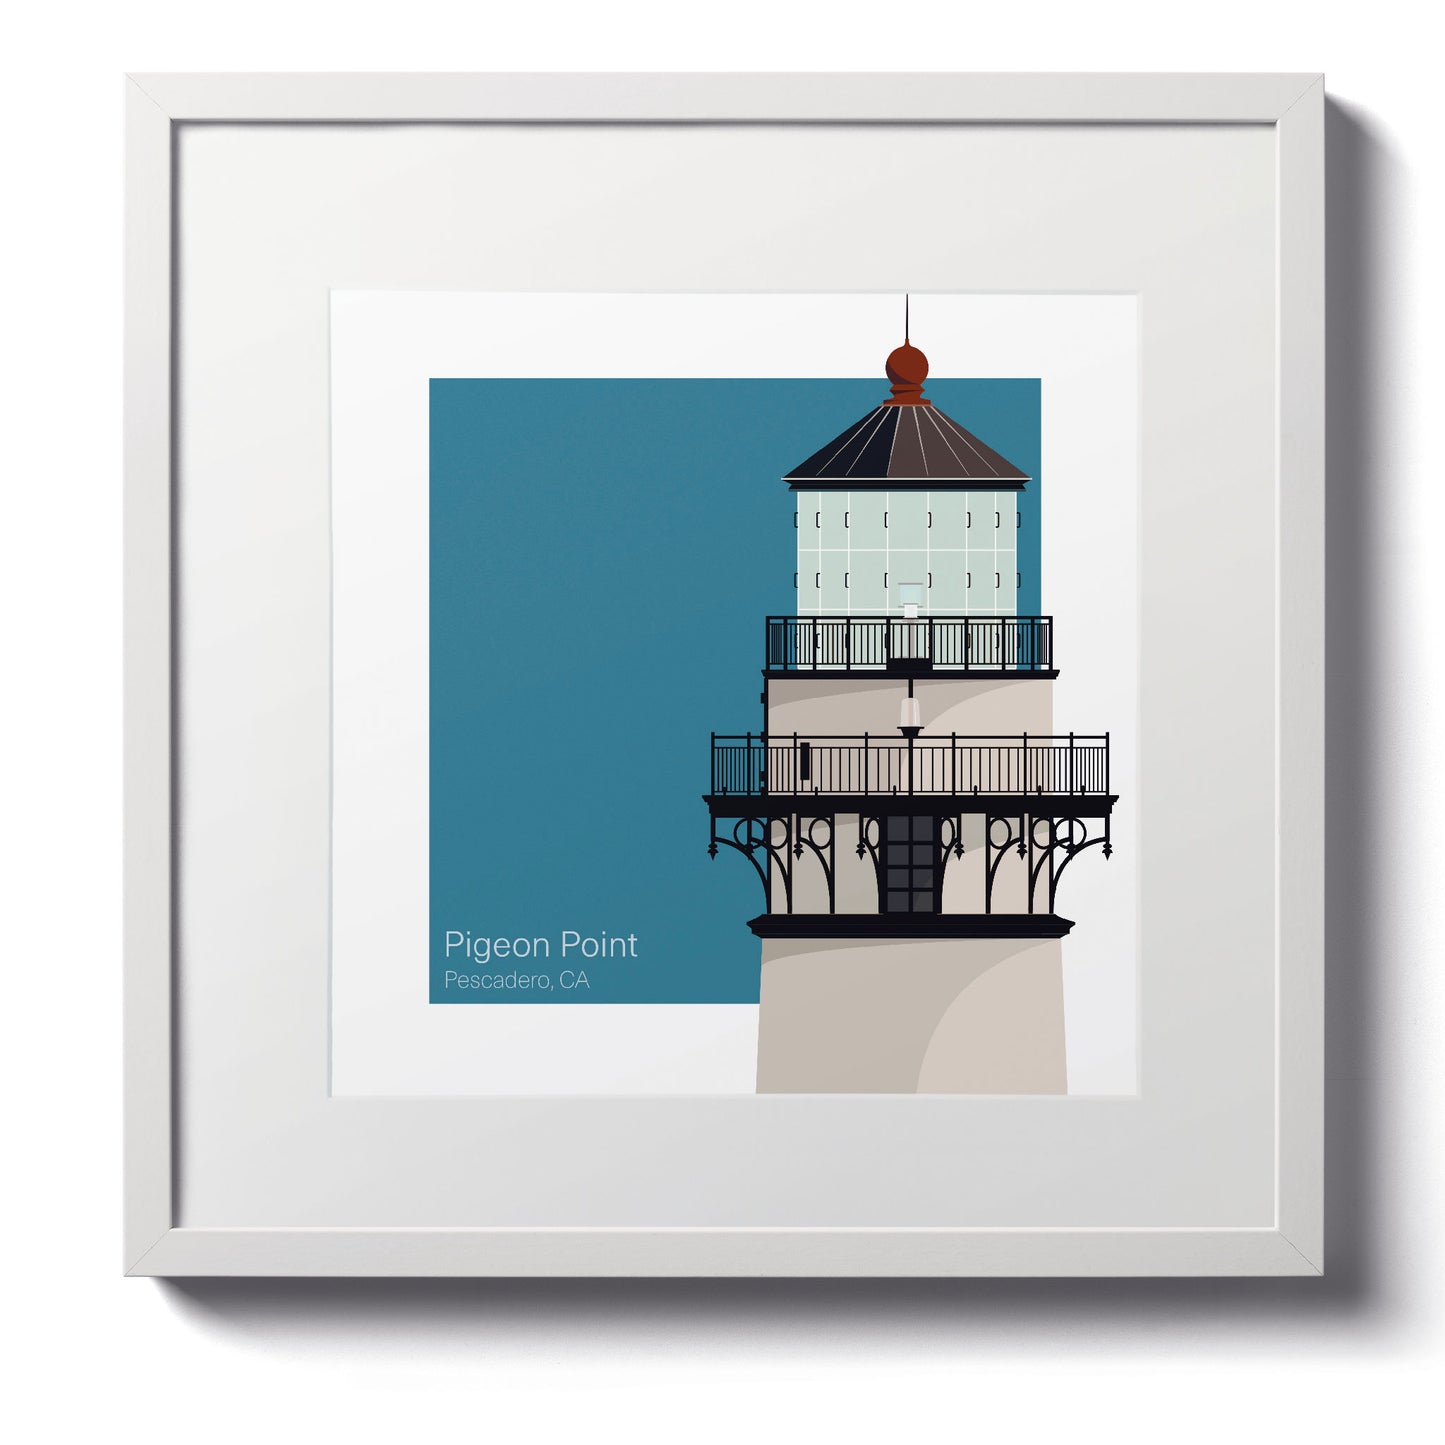 Illustration of the Pigeon Point lighthouse, CA, USA. On a white background with aqua blue square as a backdrop., in a white frame  and measuring 12"x12" (30x30cm).